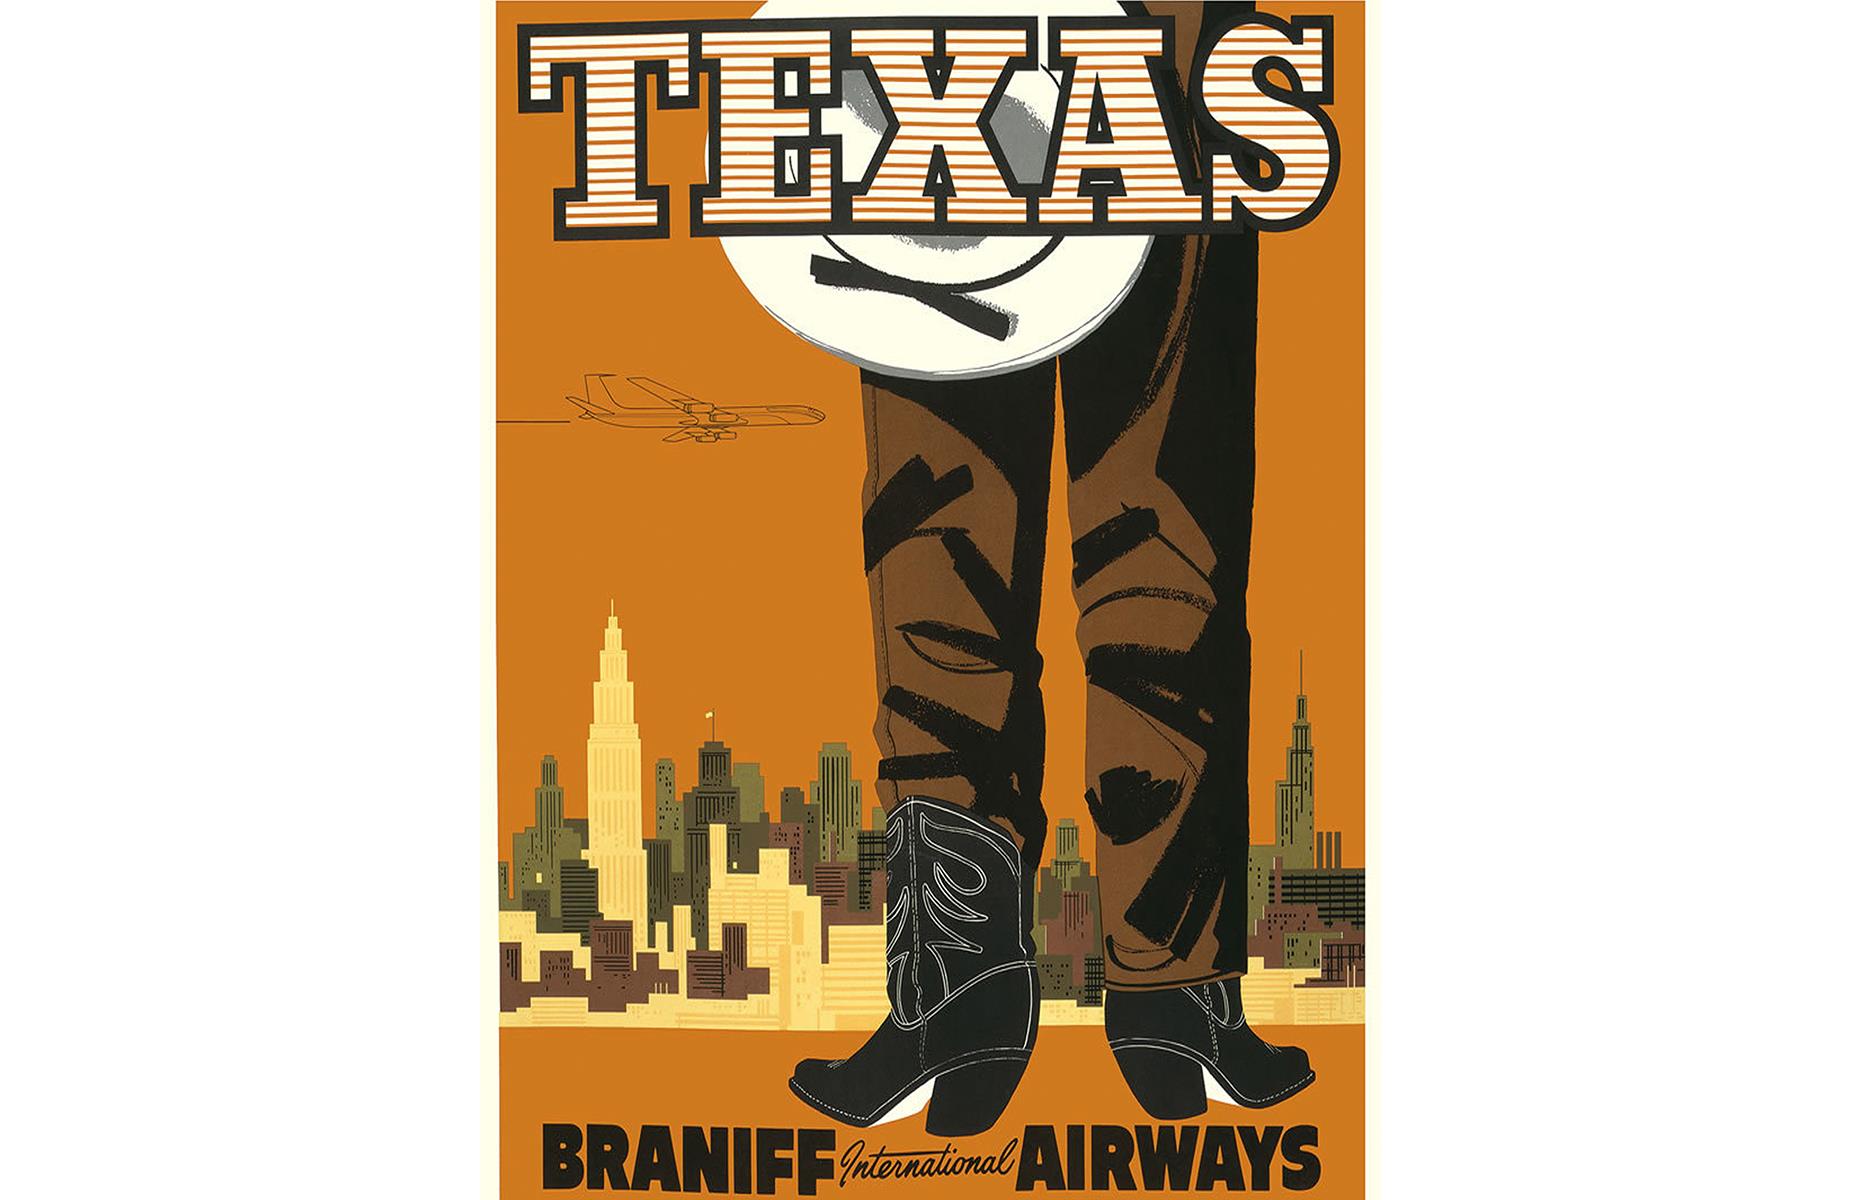 Operating from the late 1920s until the 1980s, Braniff International Airways served the USA, plus parts of South and Central America. Texas was one of the airline's major hubs and here the Lone Star State is represented with cowboy boots, a Stetson hat and a captivating cityscape rising in the background.